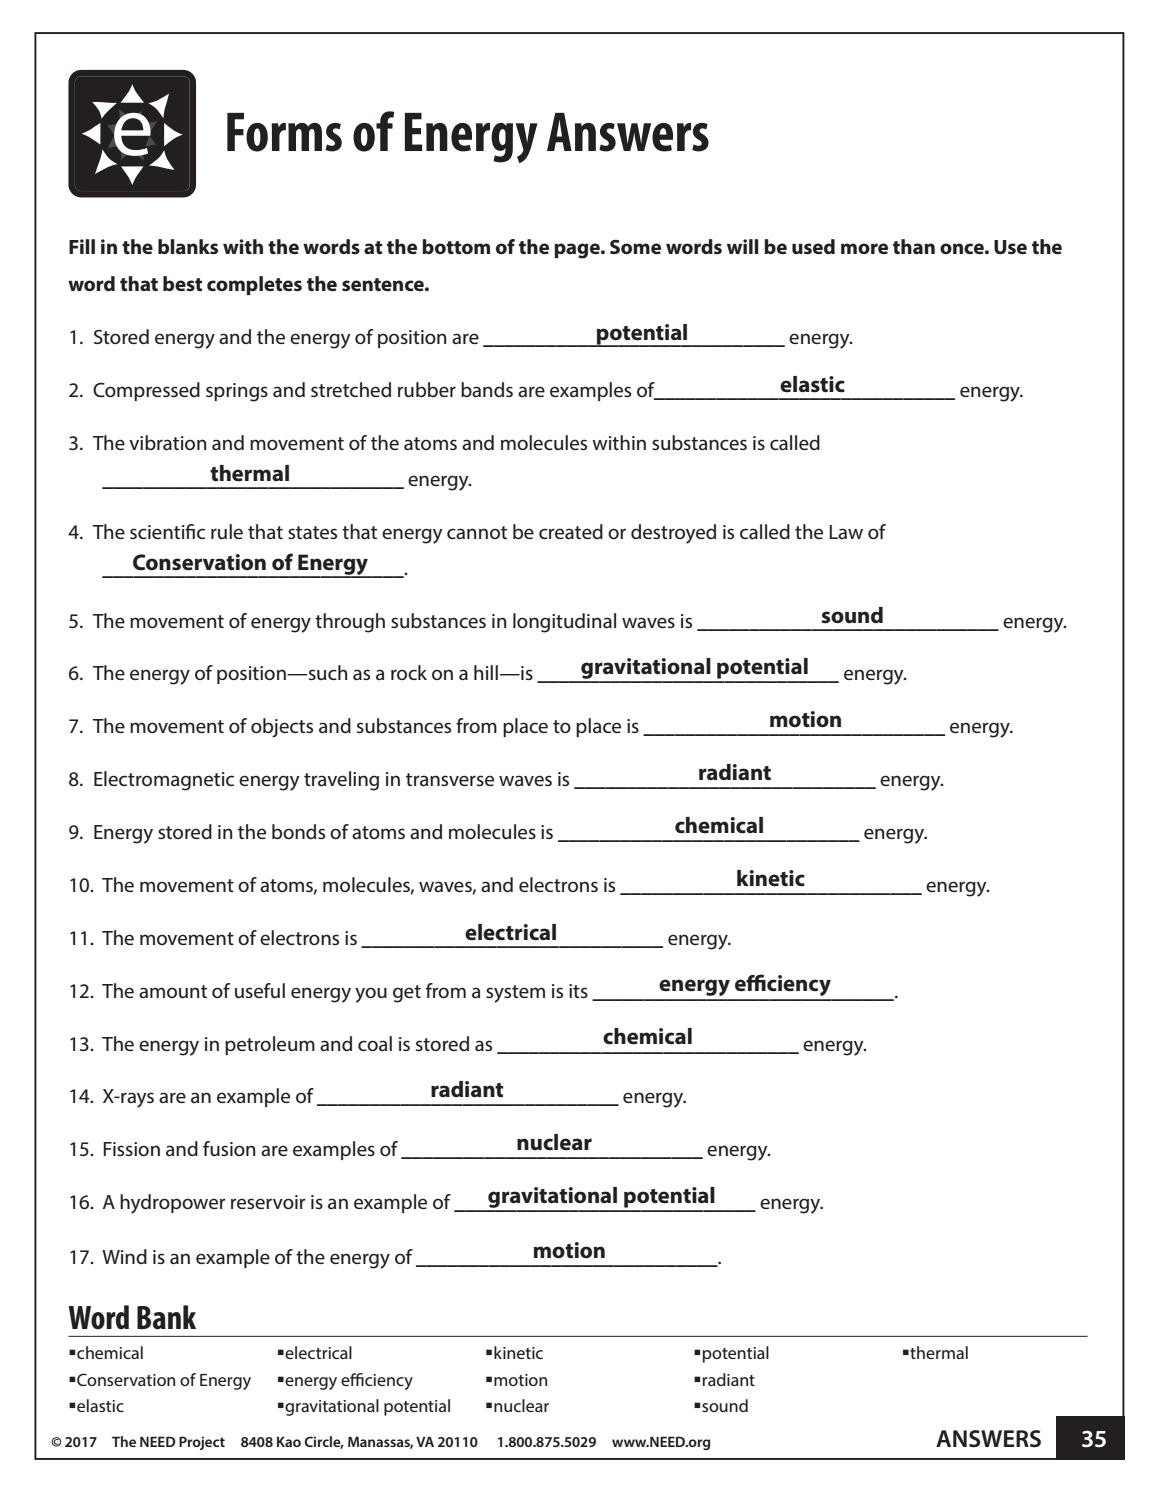 Forms Of Energy Worksheet Answers Intermediate Energy Infobook Activities by Need Project issuu